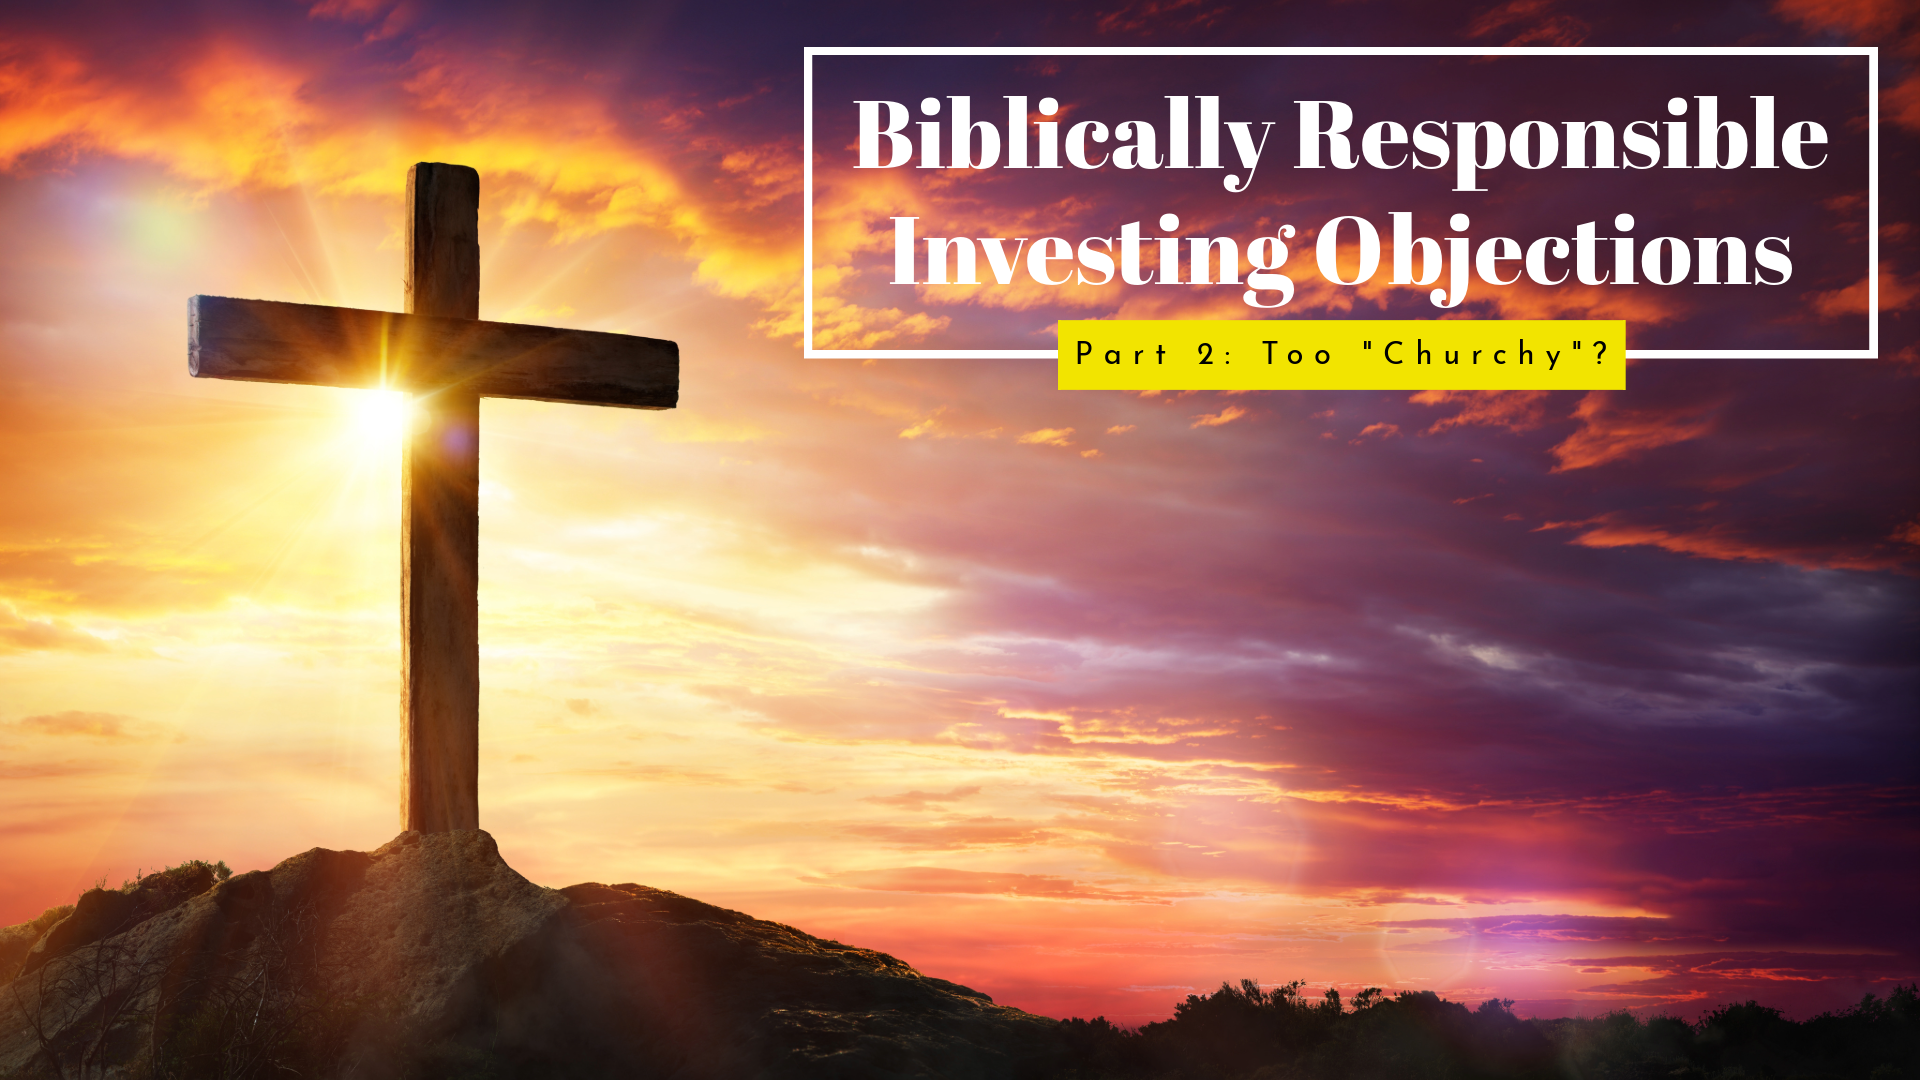 BRI Objections - Part 3: Too "churchy"?